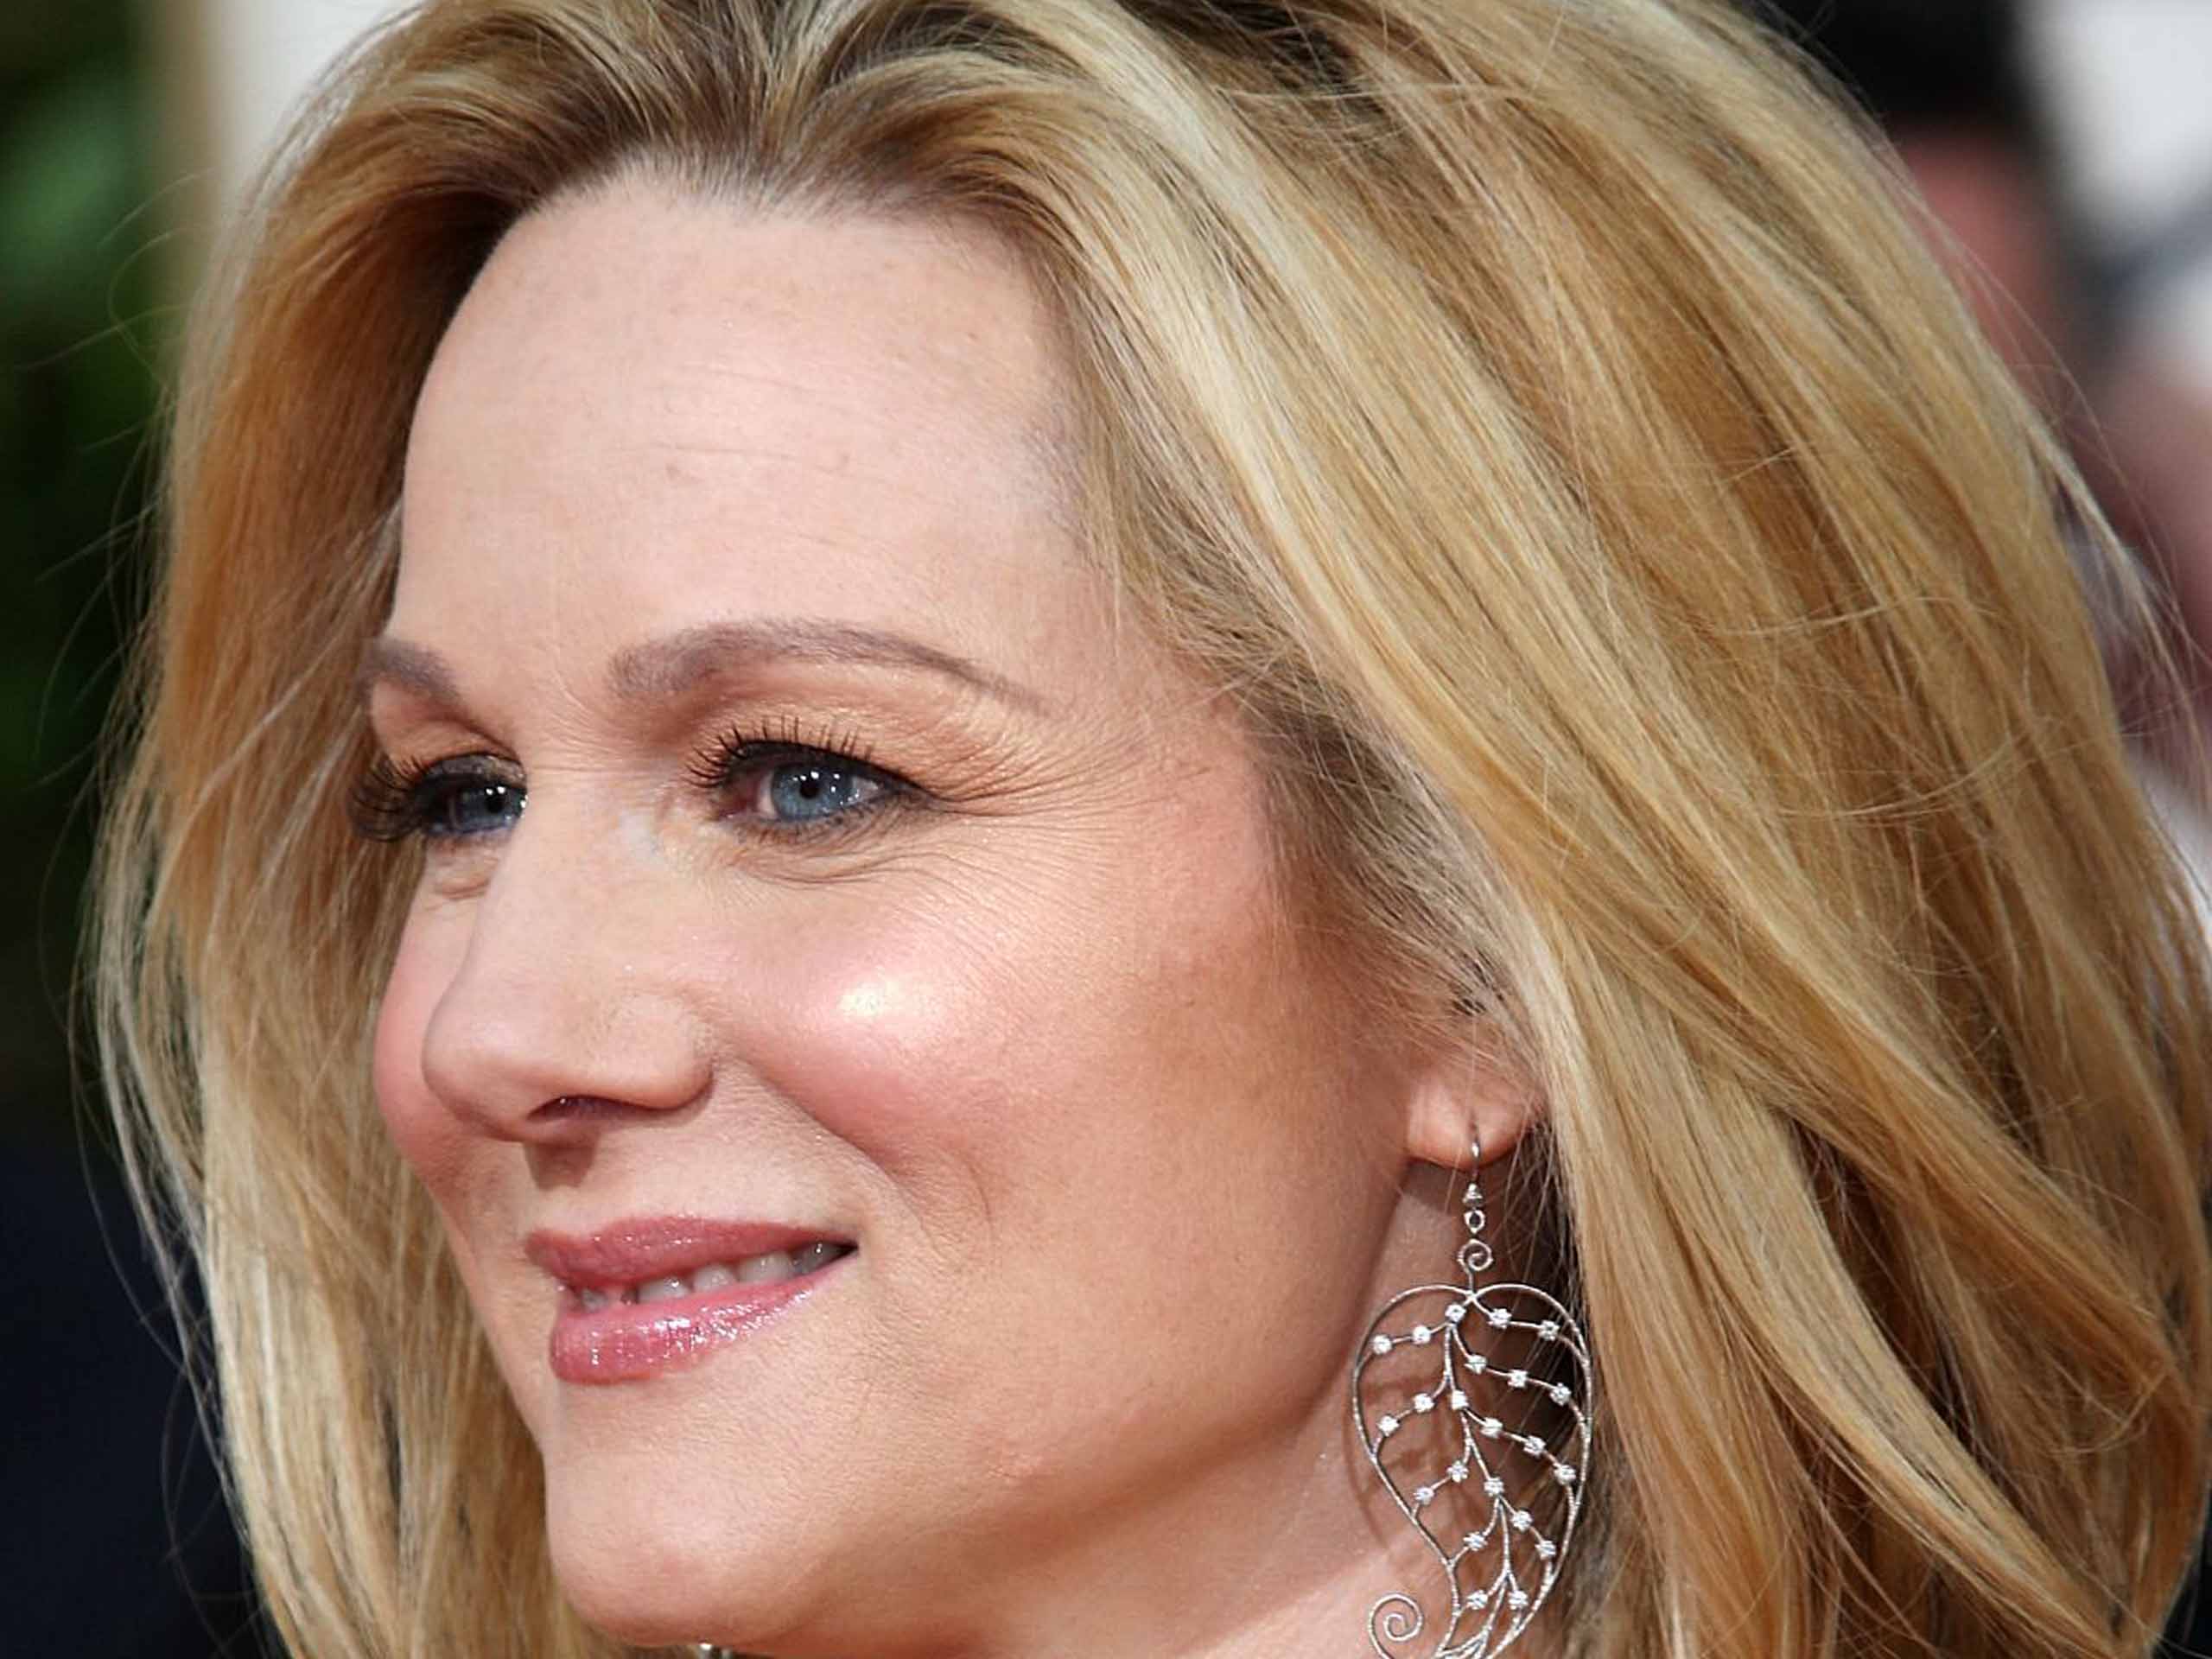 Laura Linney Wallpapers High Resolution and Quality Download.